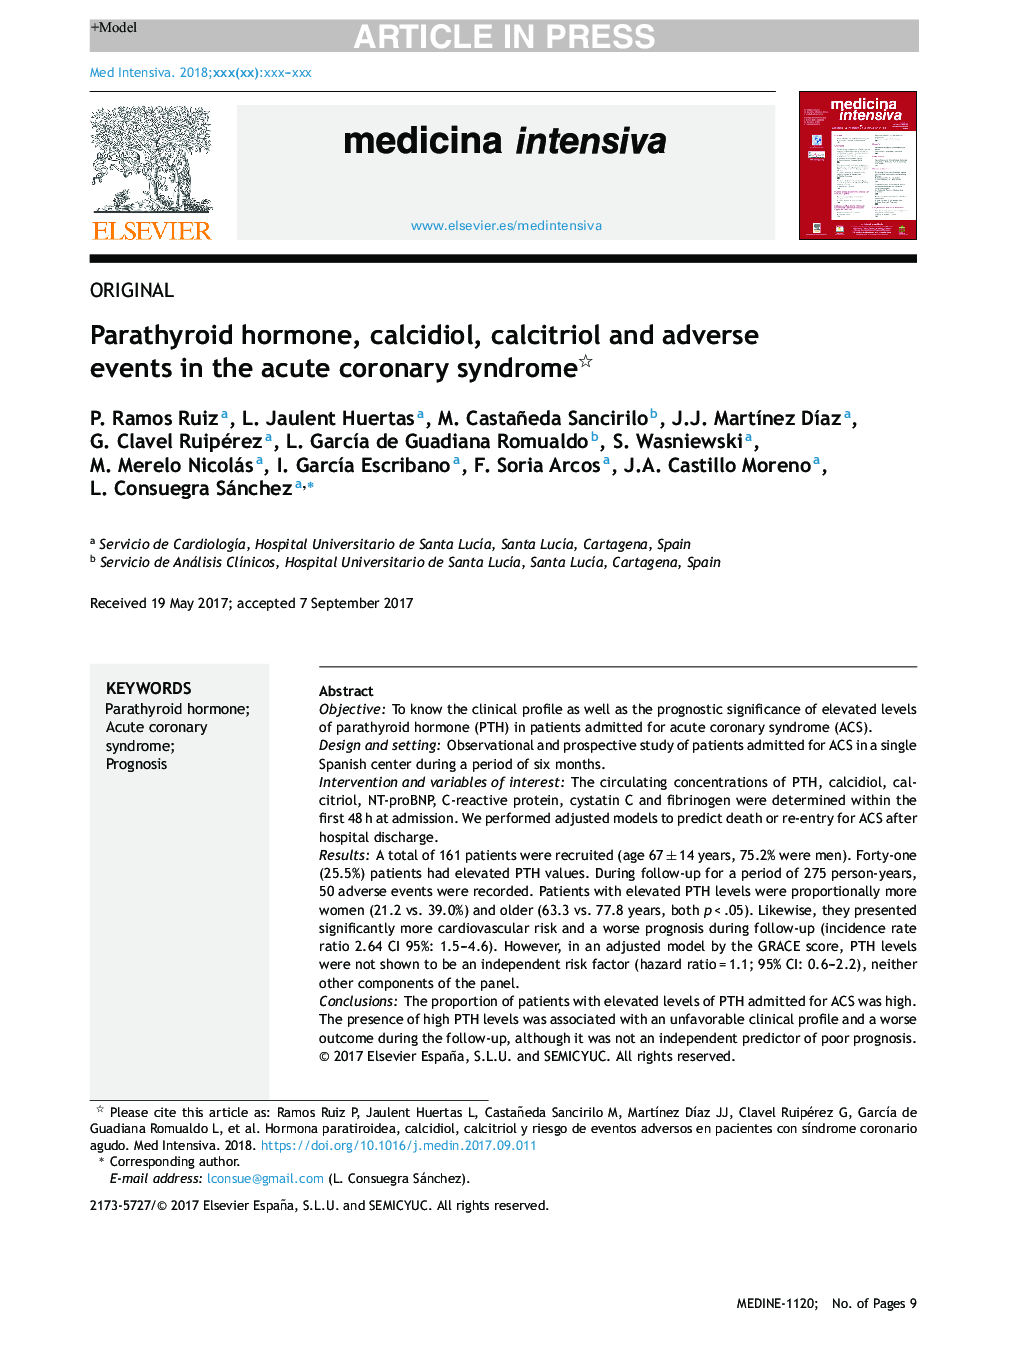 Parathyroid hormone, calcidiol, calcitriol and adverse events in the acute coronary syndrome